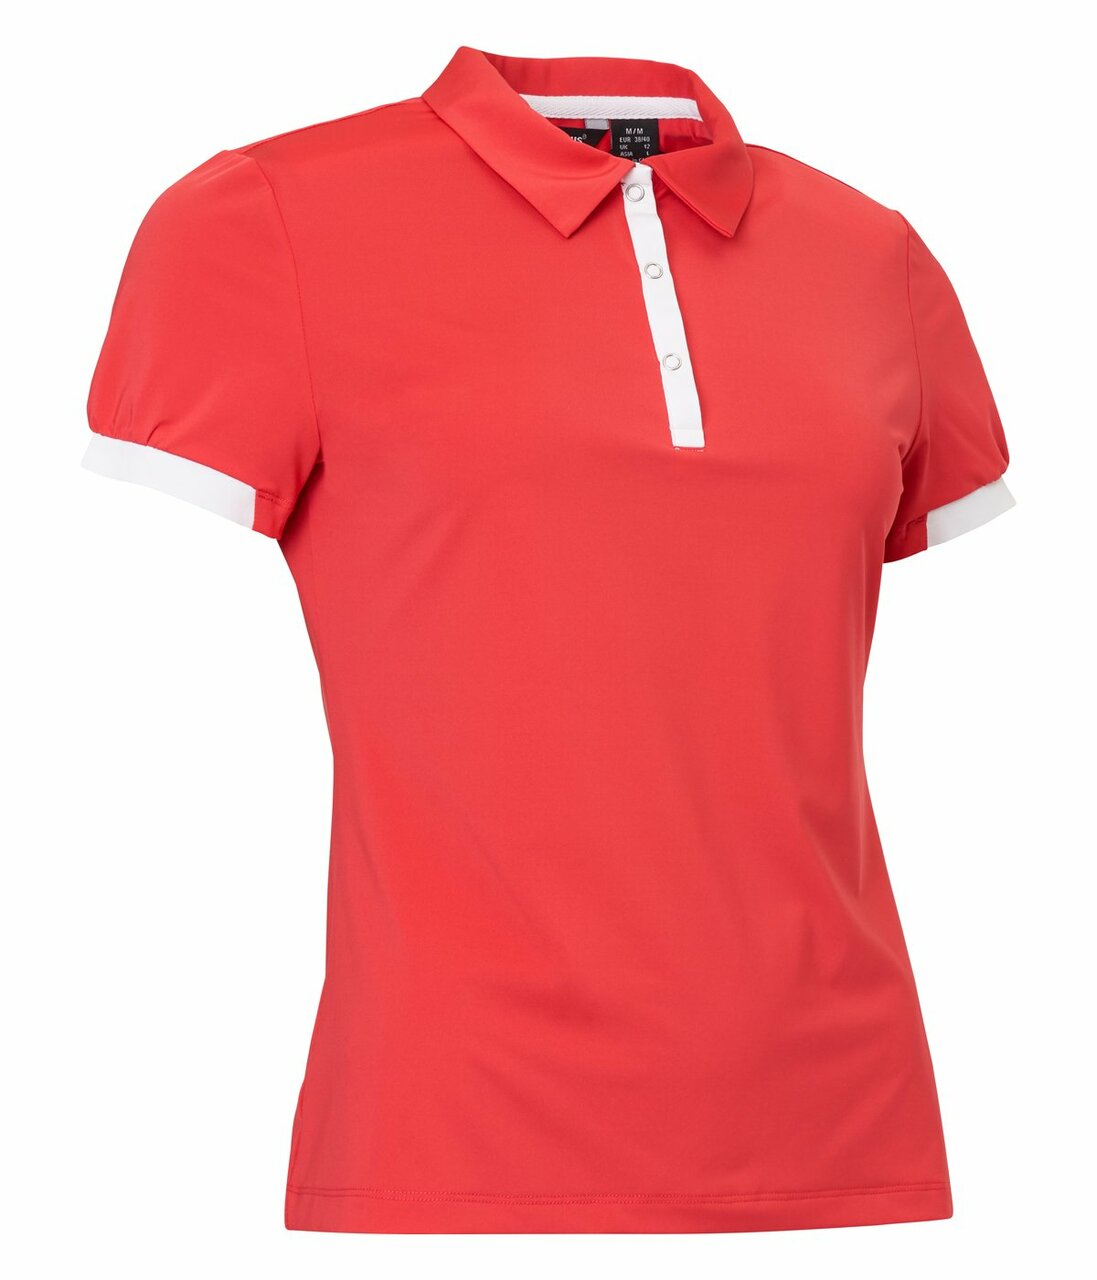 Abacus Sports Wear: Women’s Poppy Red High-Performance Golf Polo (Size 2XL) SALE